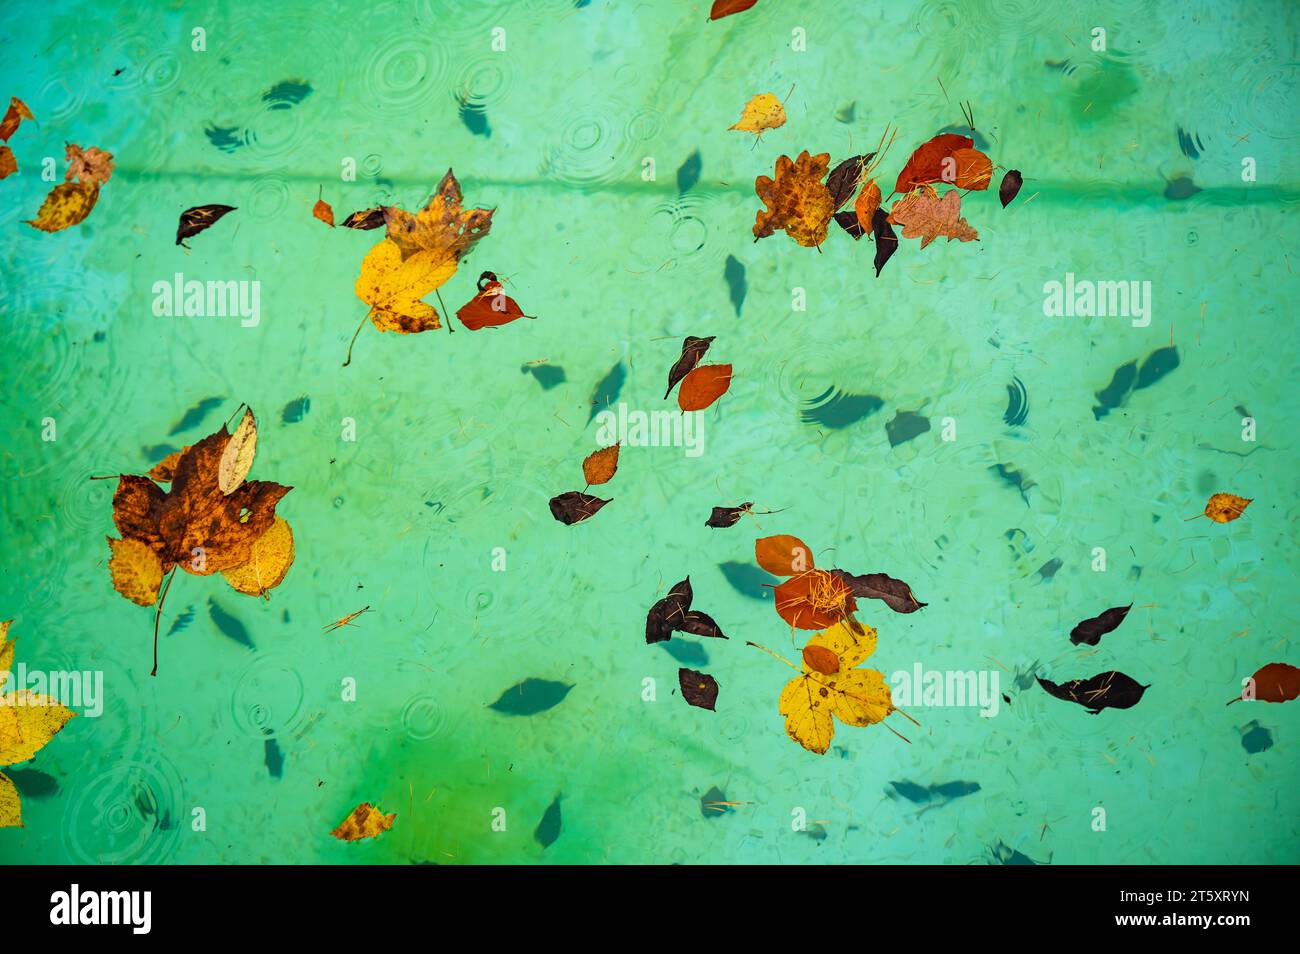 Many autumn color leaf and needle on surface and bottom pool when rains. Abstract natural background. Stock Photo